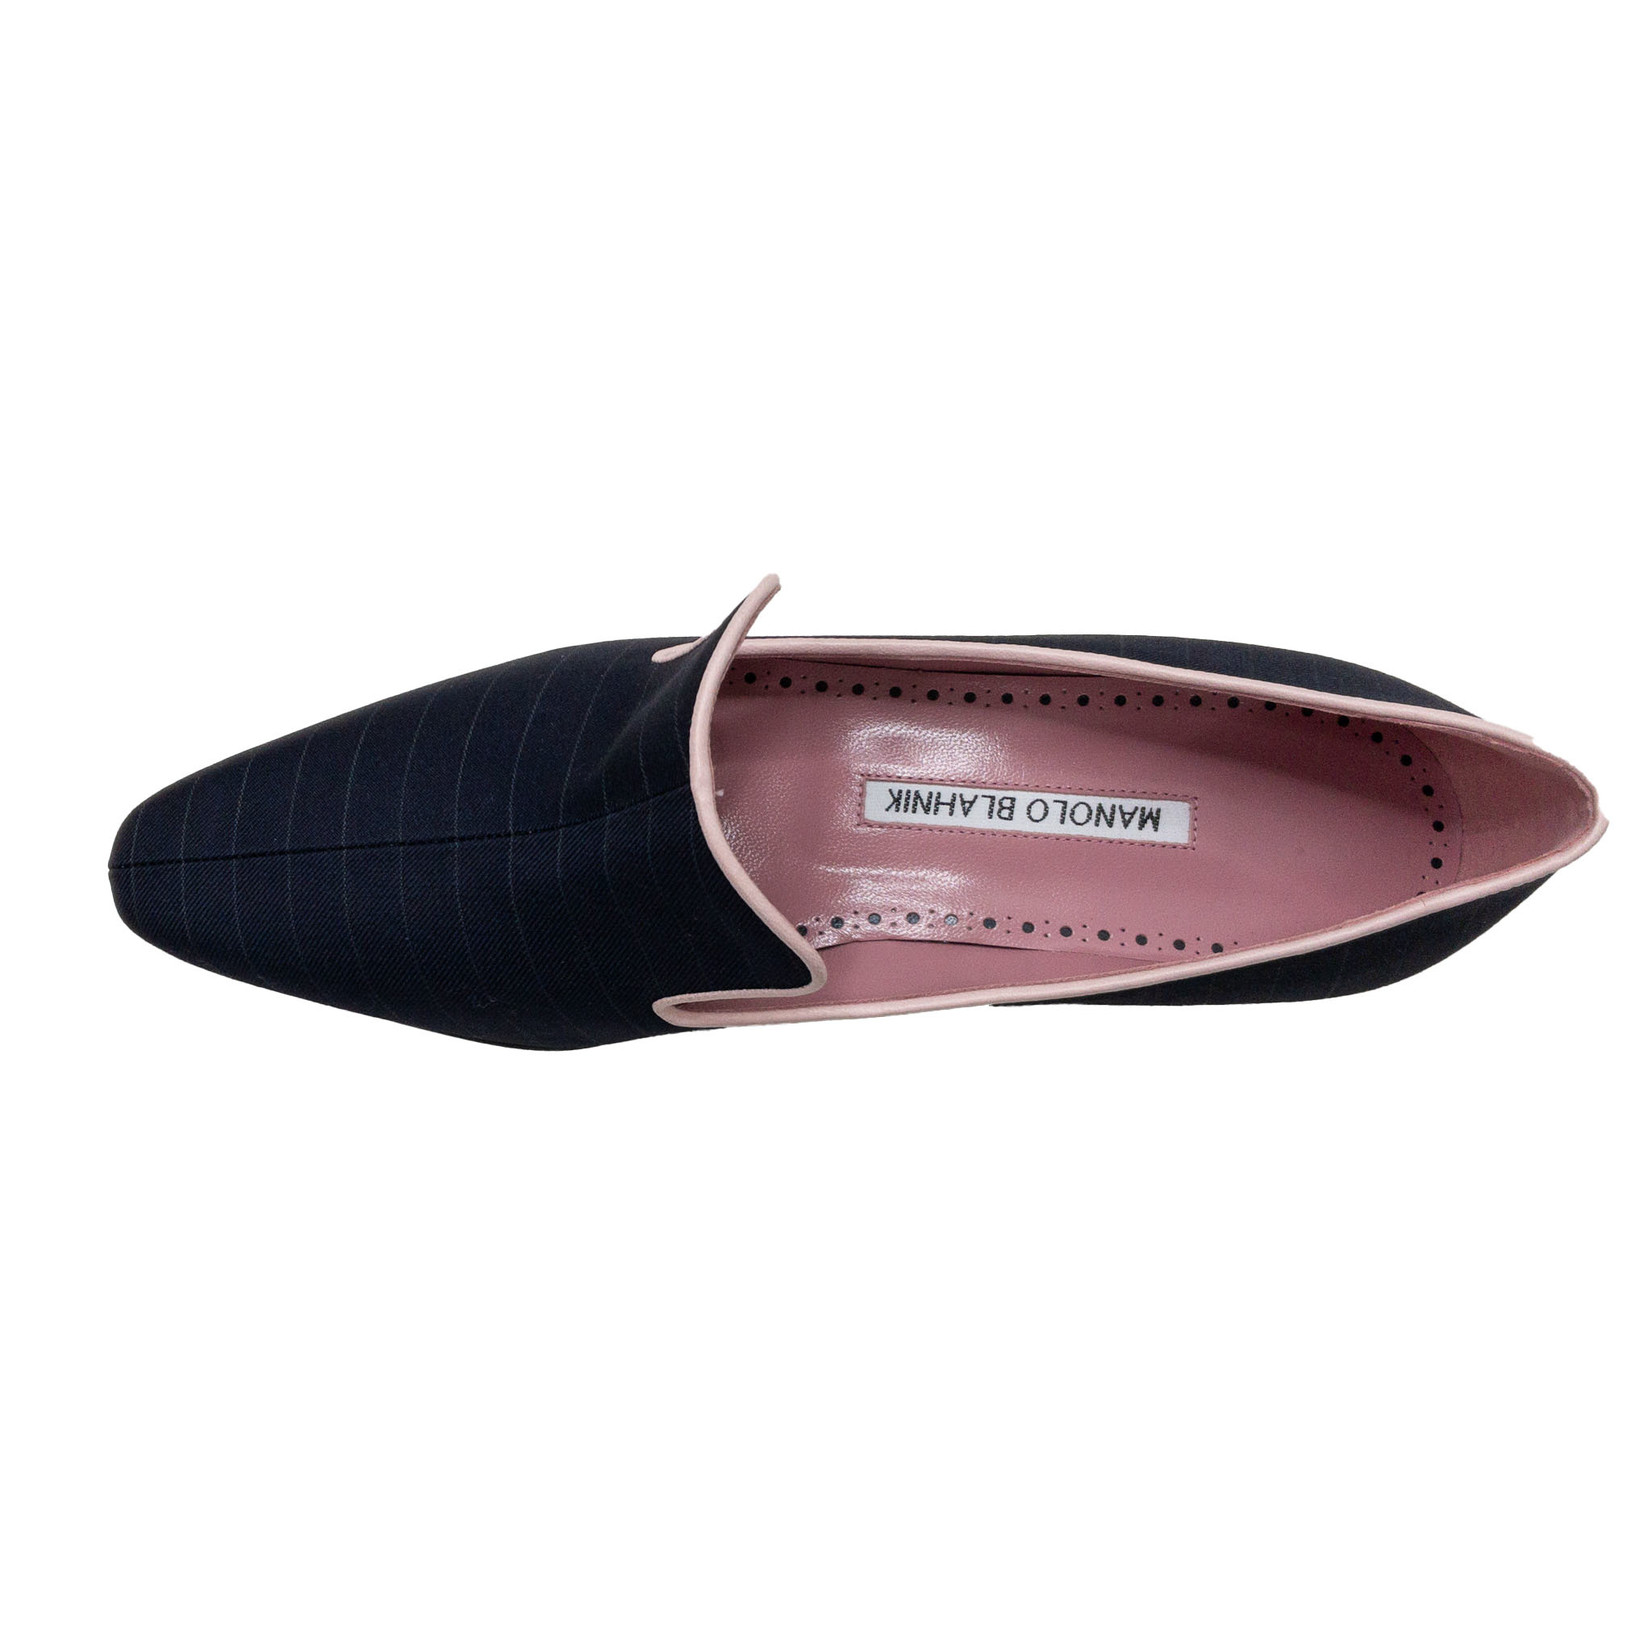 MANOLO BLAHNIK Rayolflat Navy with Stripes Loafer 010